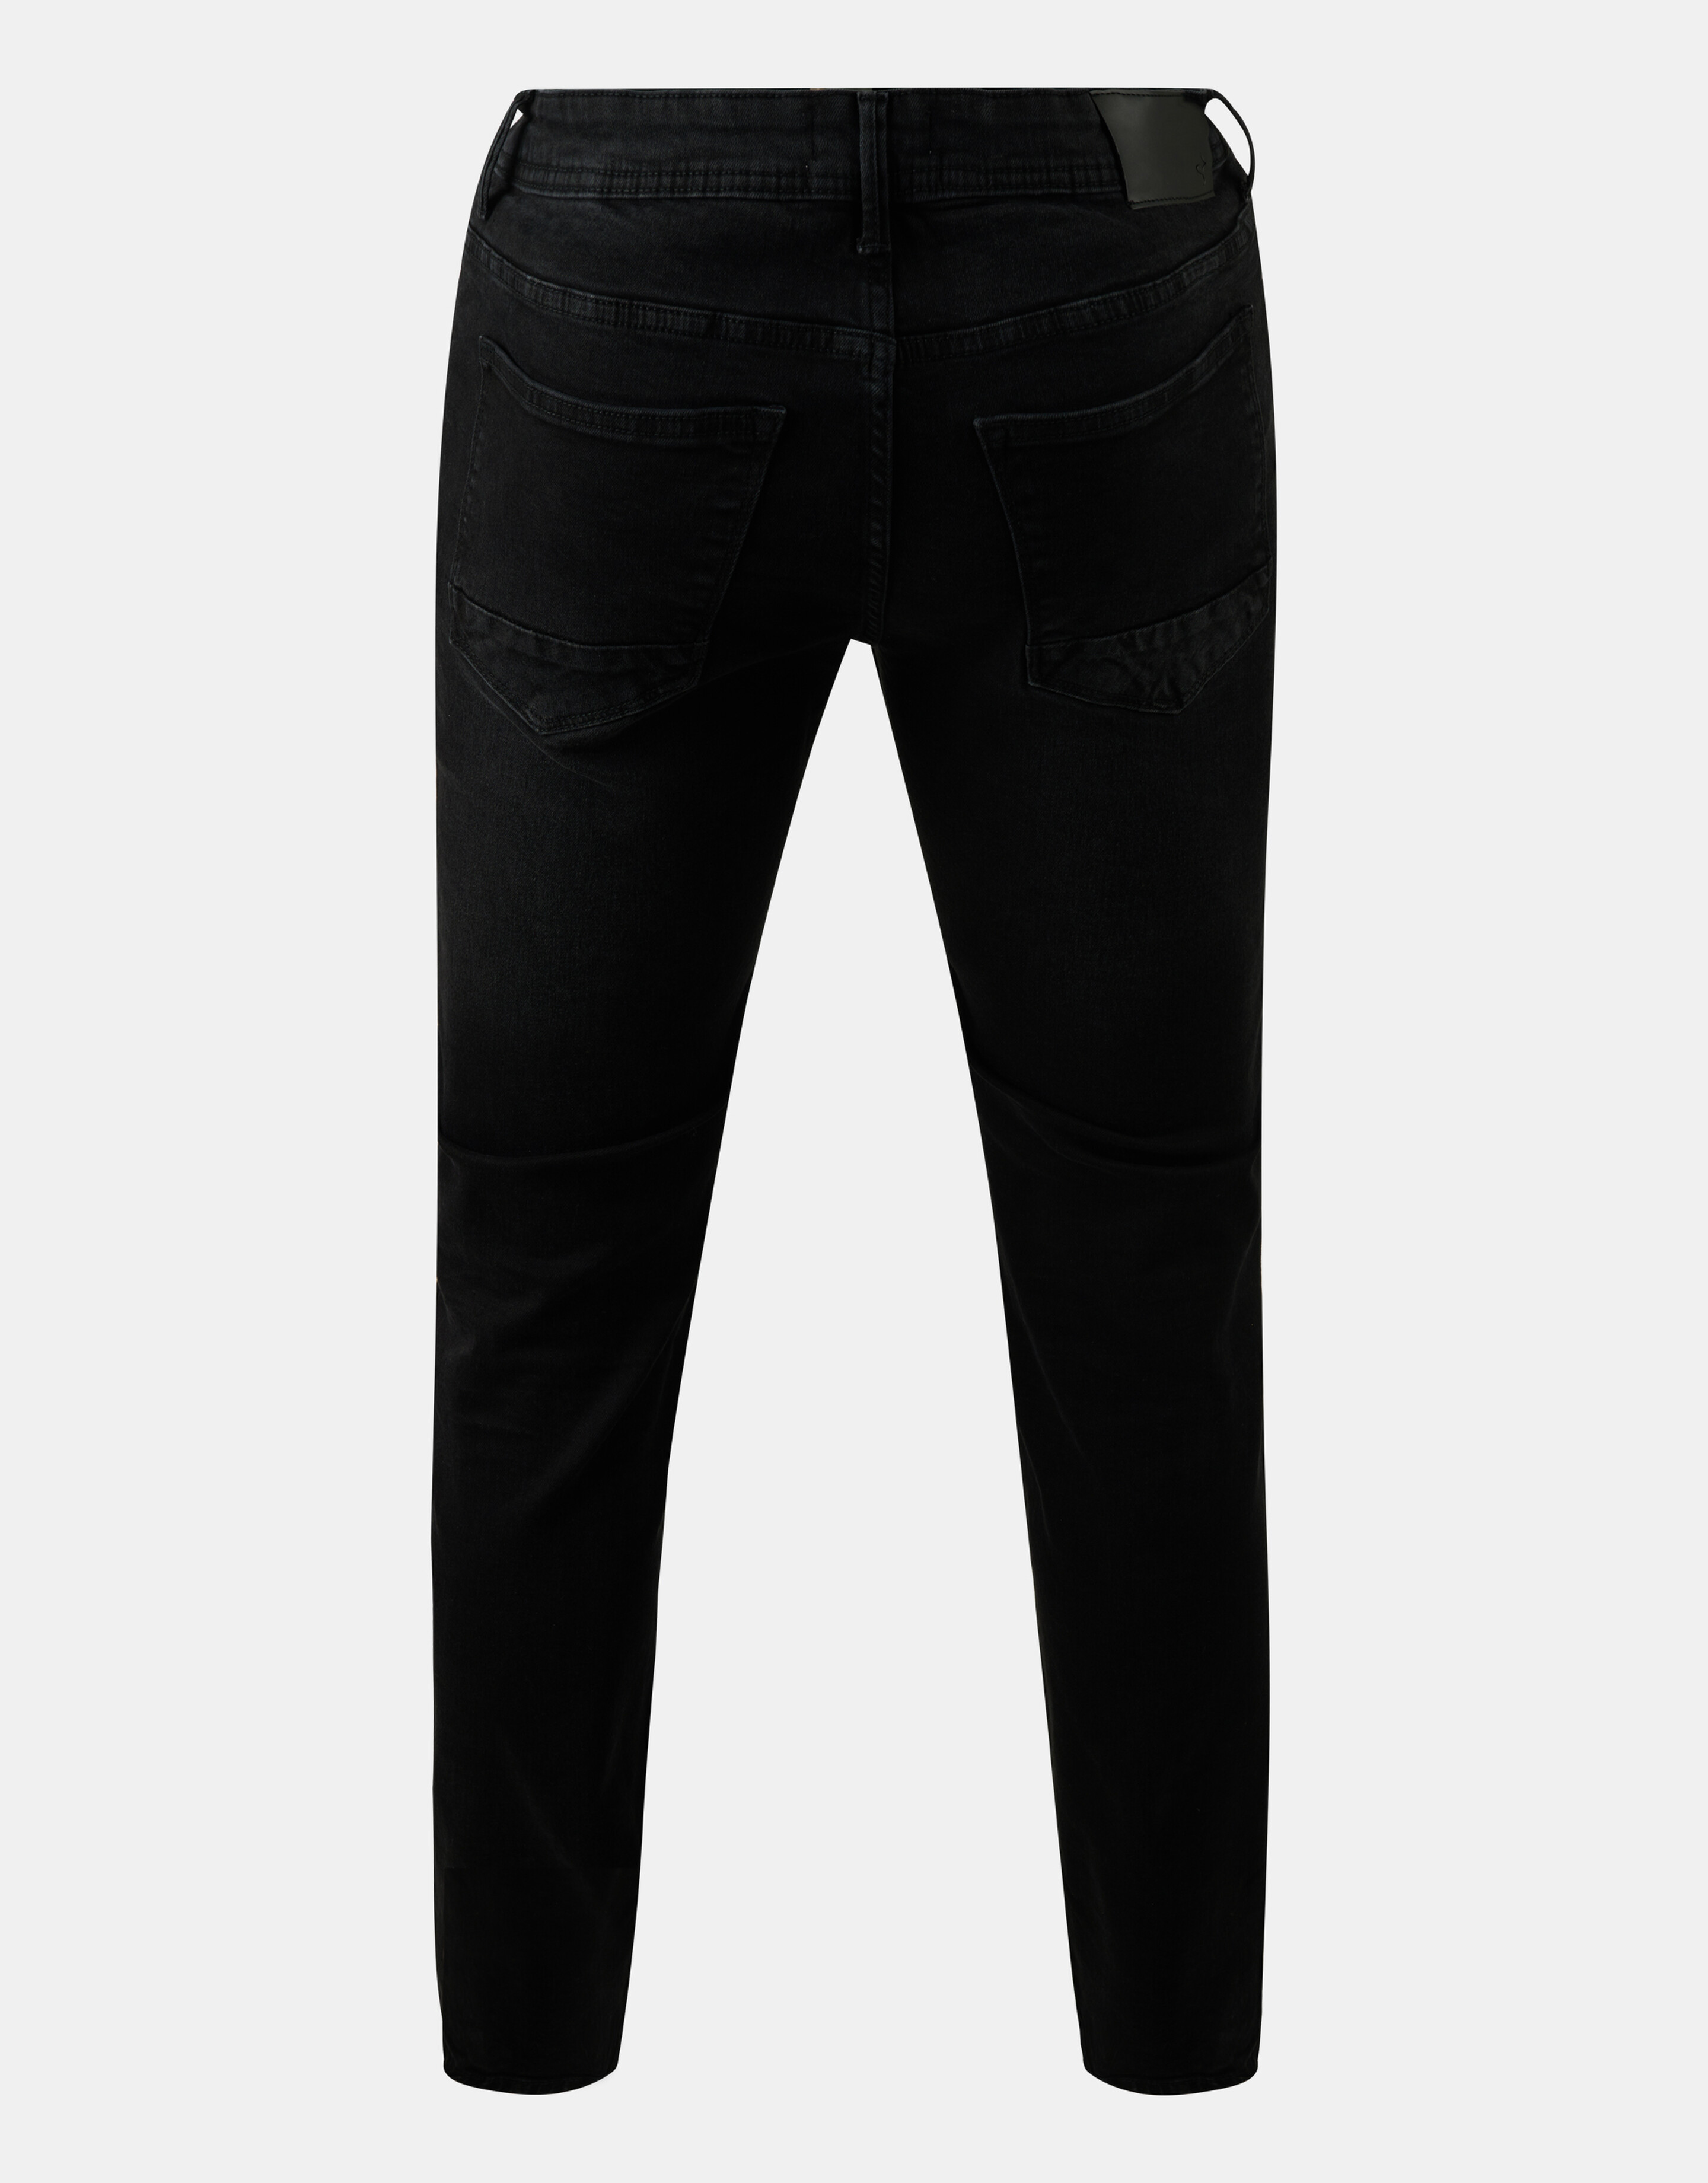 Straigt Jeans Washed Black L34 Refill